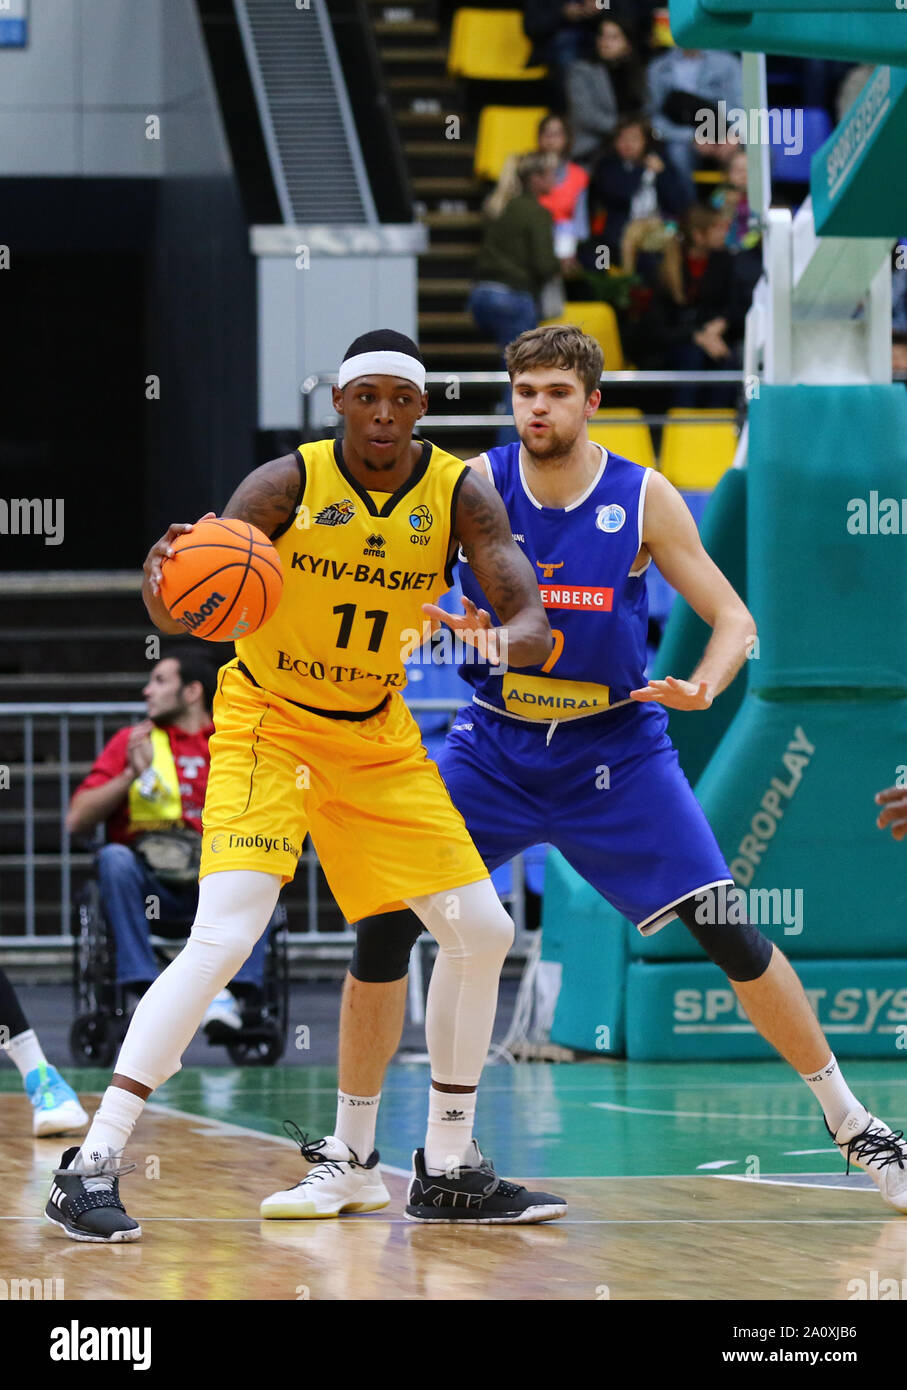 KYIV, UKRAINE - SEPTEMBER 20, 2019: Kyndahl Hill of BC Kyiv Basket (L) and  Ian Tristan Moschik of Kapfenberg Bulls in action during their FIBA  Basketball Champions League Qualifiers game in Kyiv